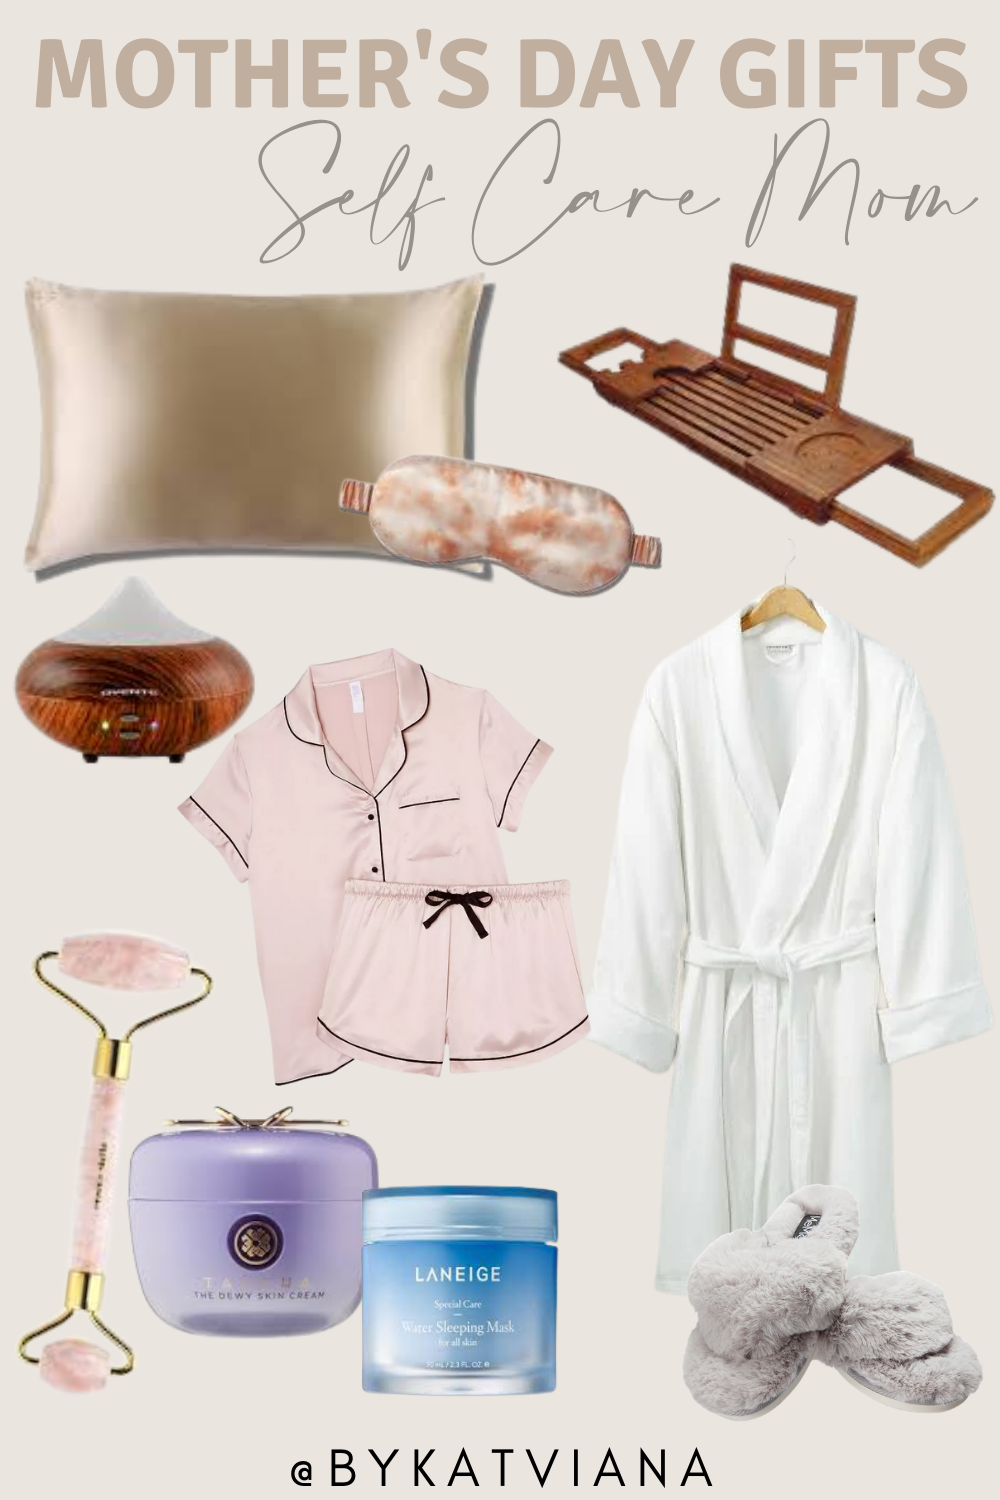 mother's day gifts ideas